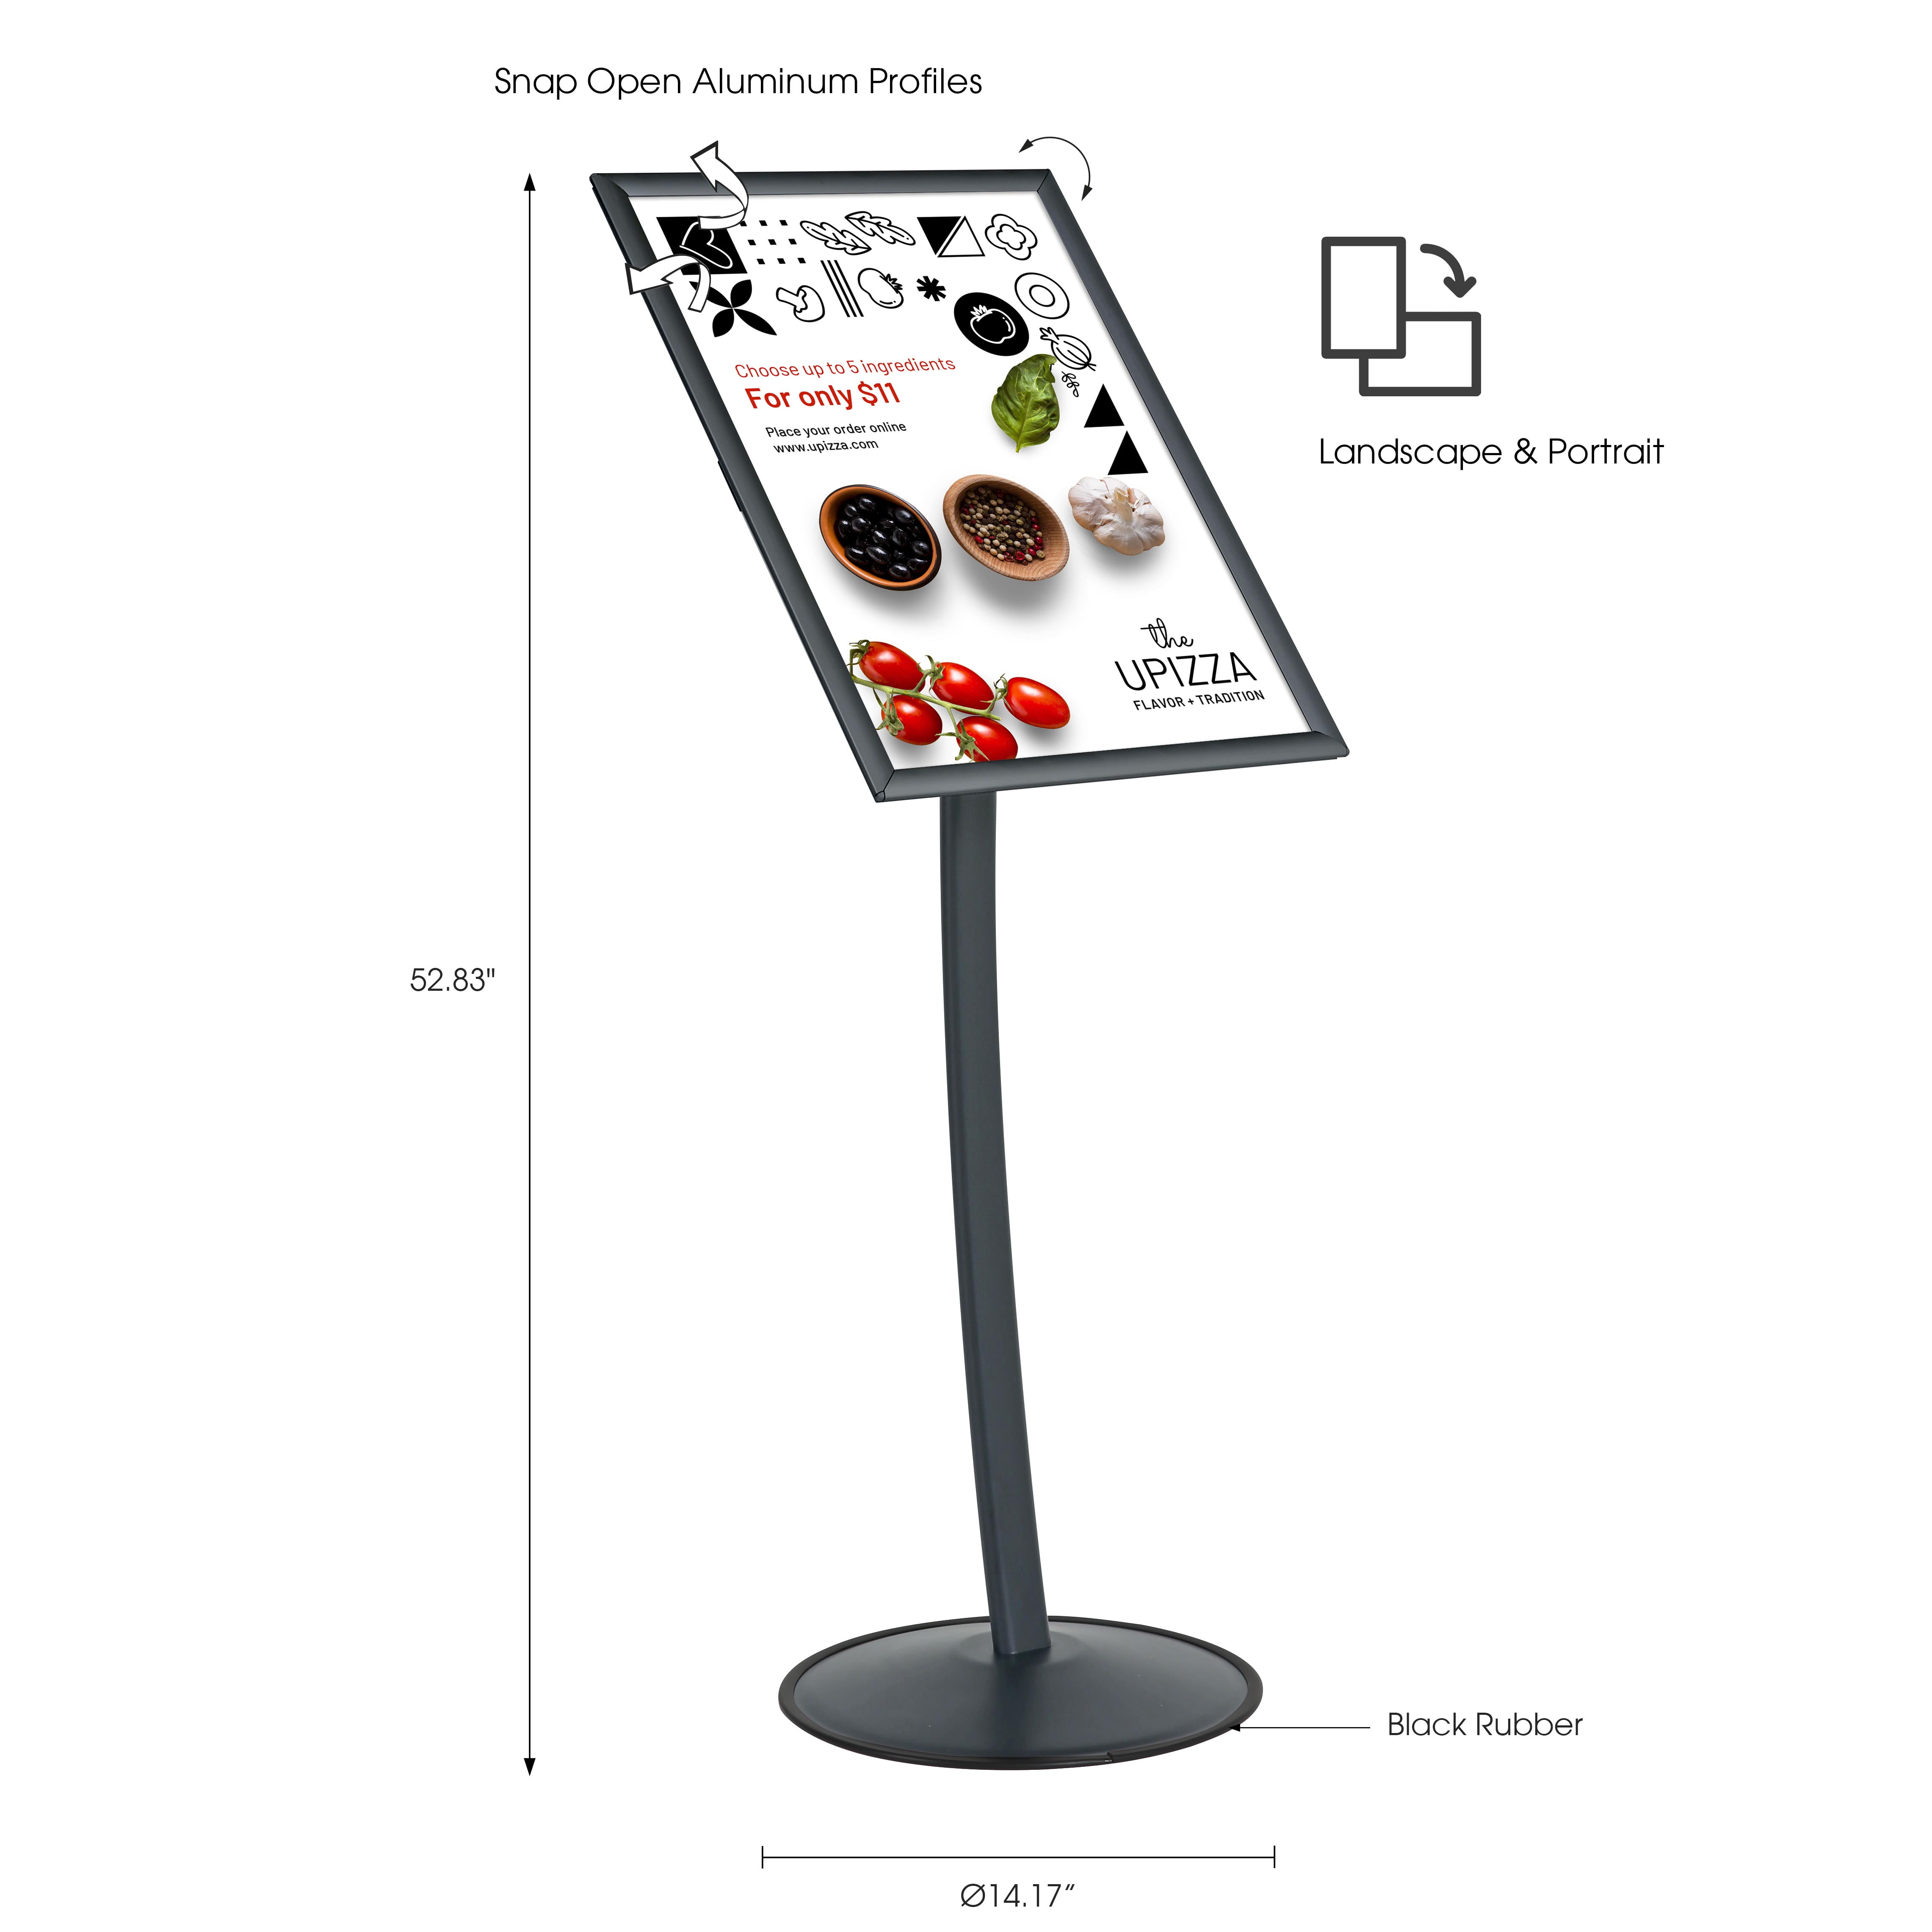 Swing Poster Display Floor Stand Kiosk for Posters – Bayfield Signs USA